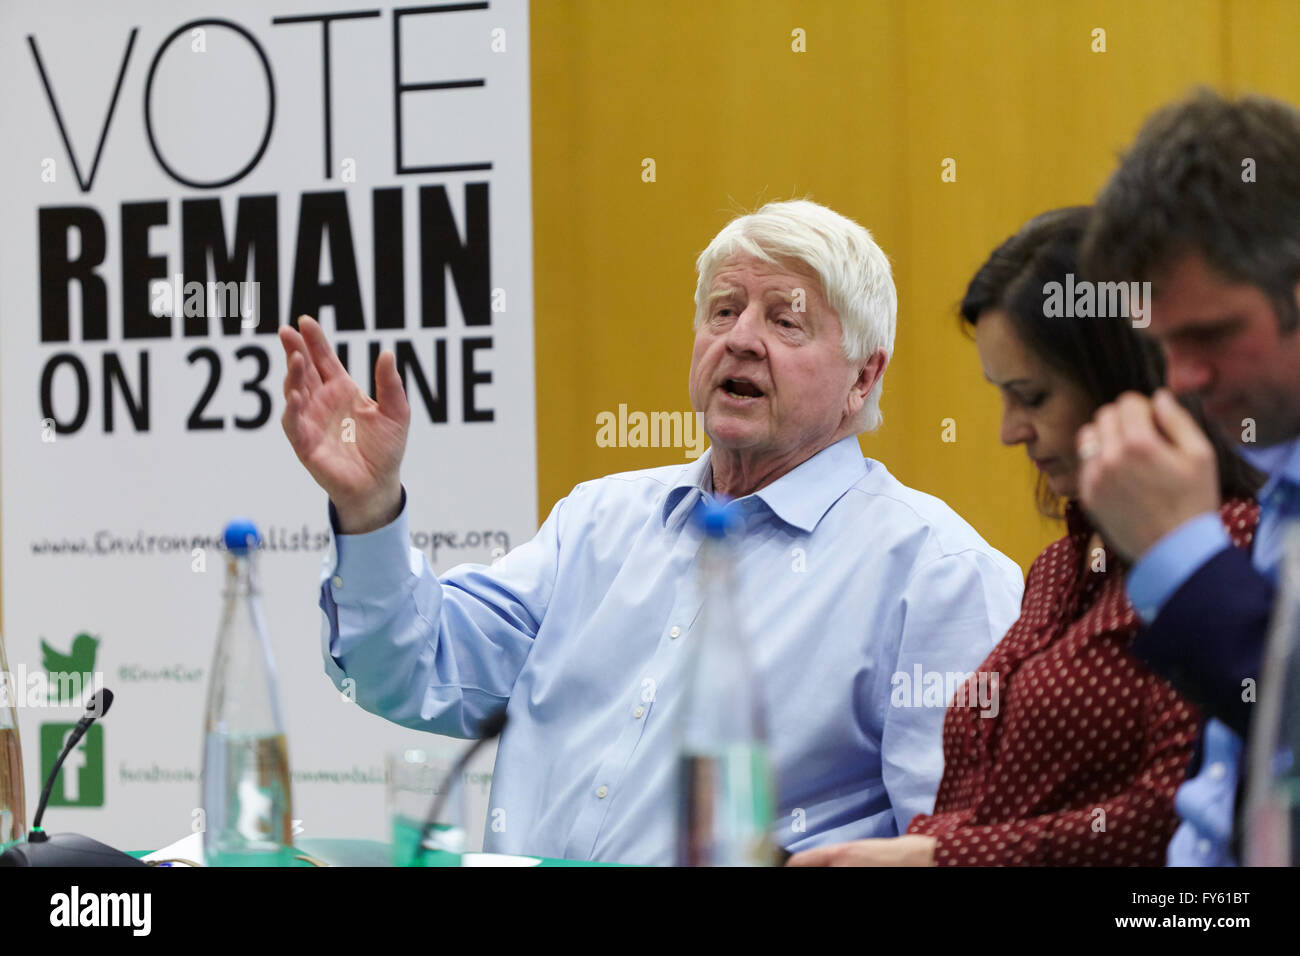 London, UK. 21st April, 2016.  Friends of the Earth and Environmentalists for Europe Remain Campaign Rally. Held at King's College London. UK. 21st April 2016 © Sam Barnes/Alamy Live News Credit:  Sam Barnes/Alamy Live News Stock Photo